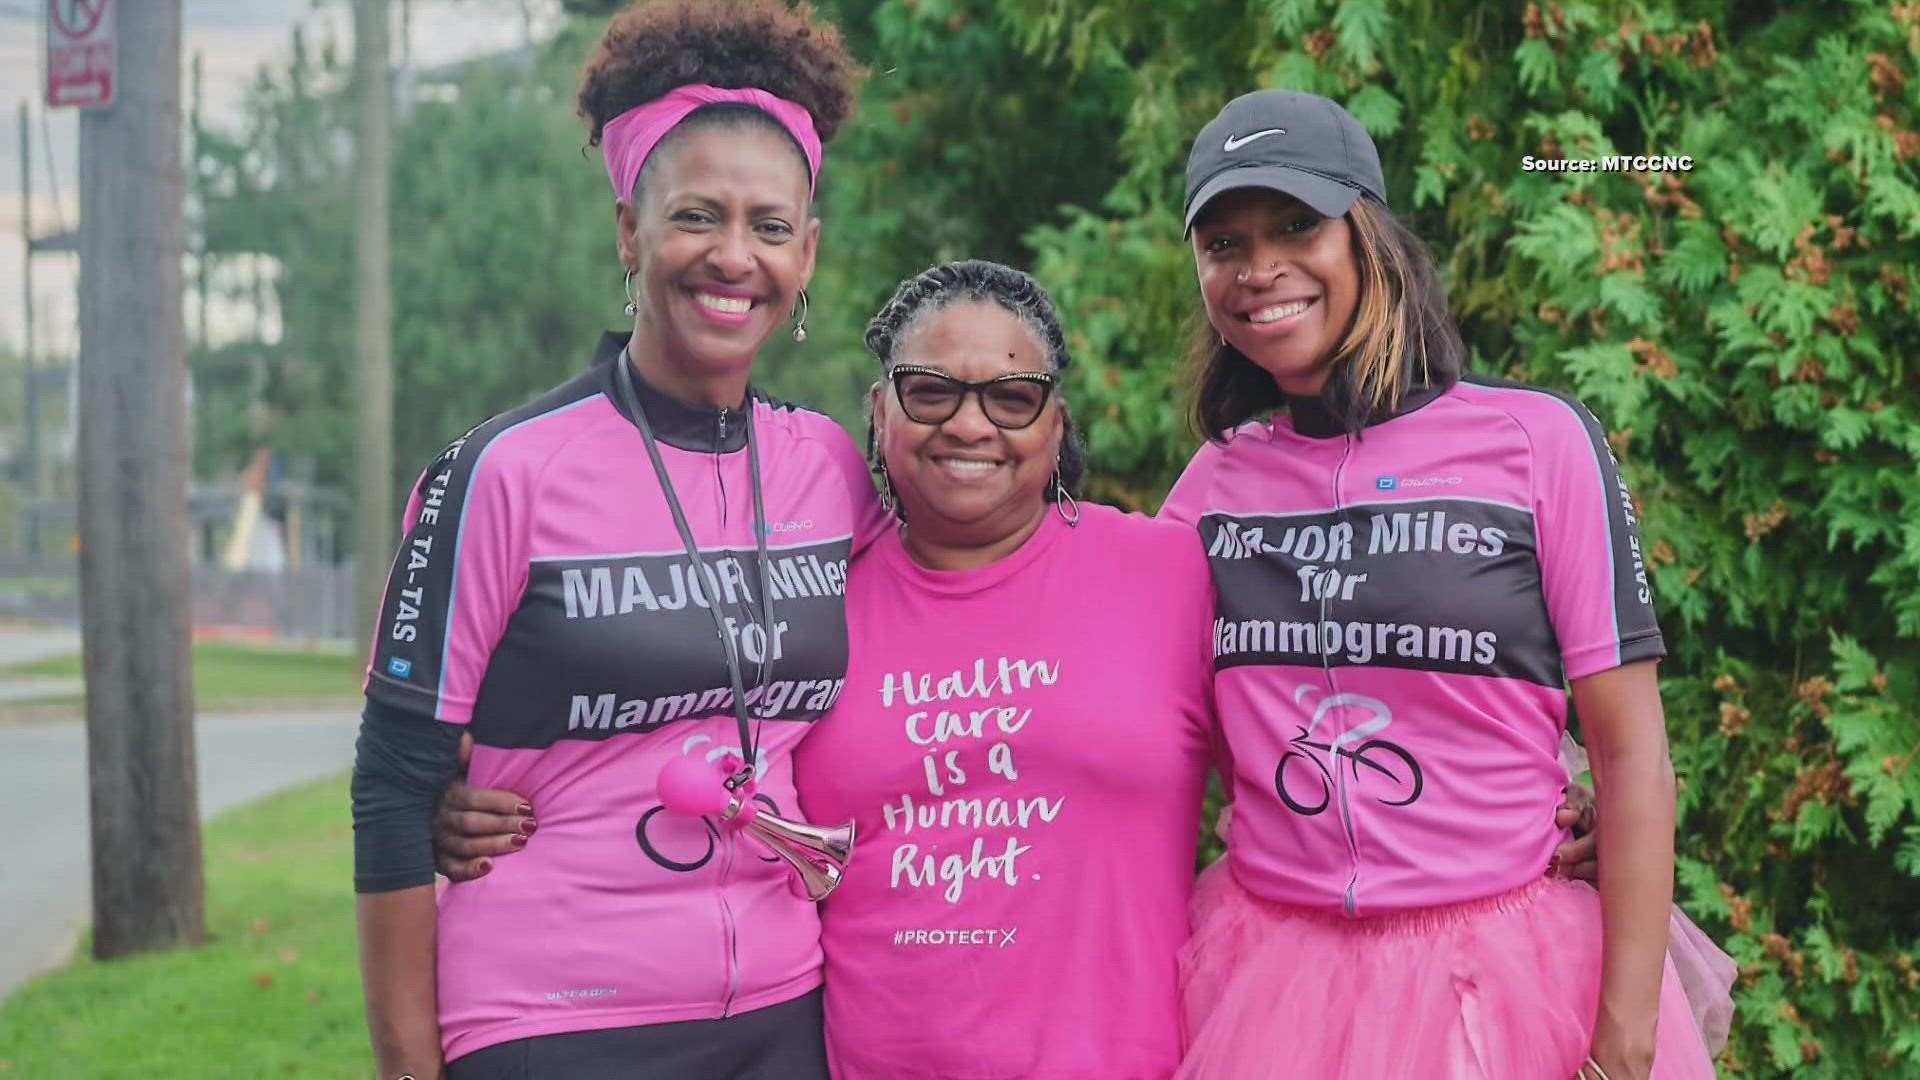 The Major Taylor Cycling Club of North Carolina (MTCCNC) is hosting the second annual Major Miles for Mammograms Cycling Event on Saturday.